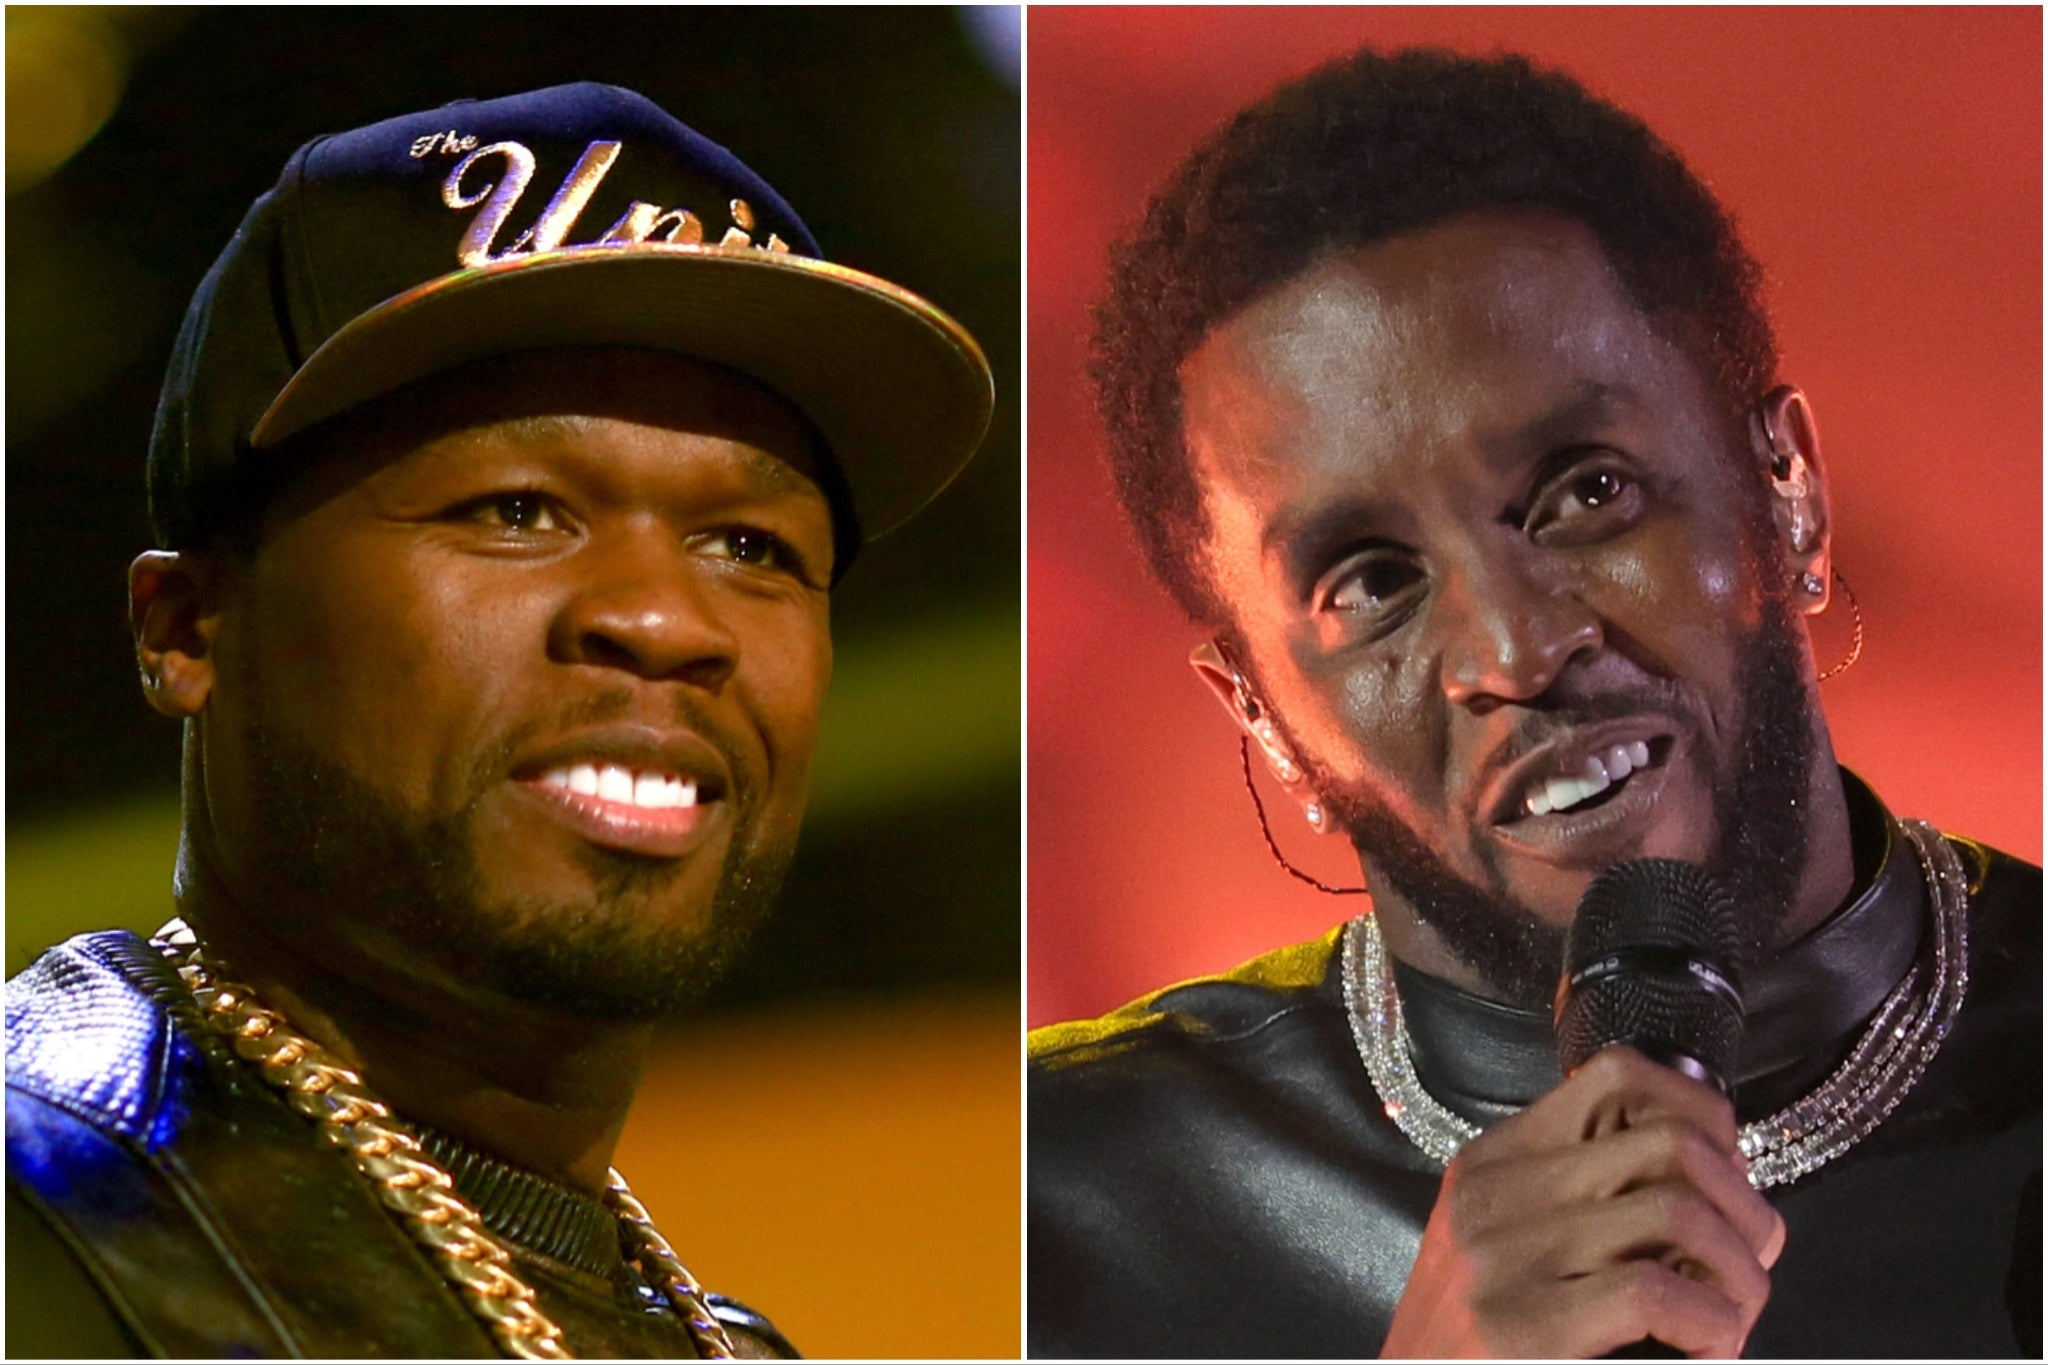 50 Cent has continued to publicly comment on string of lawsuits being brought against Diddy